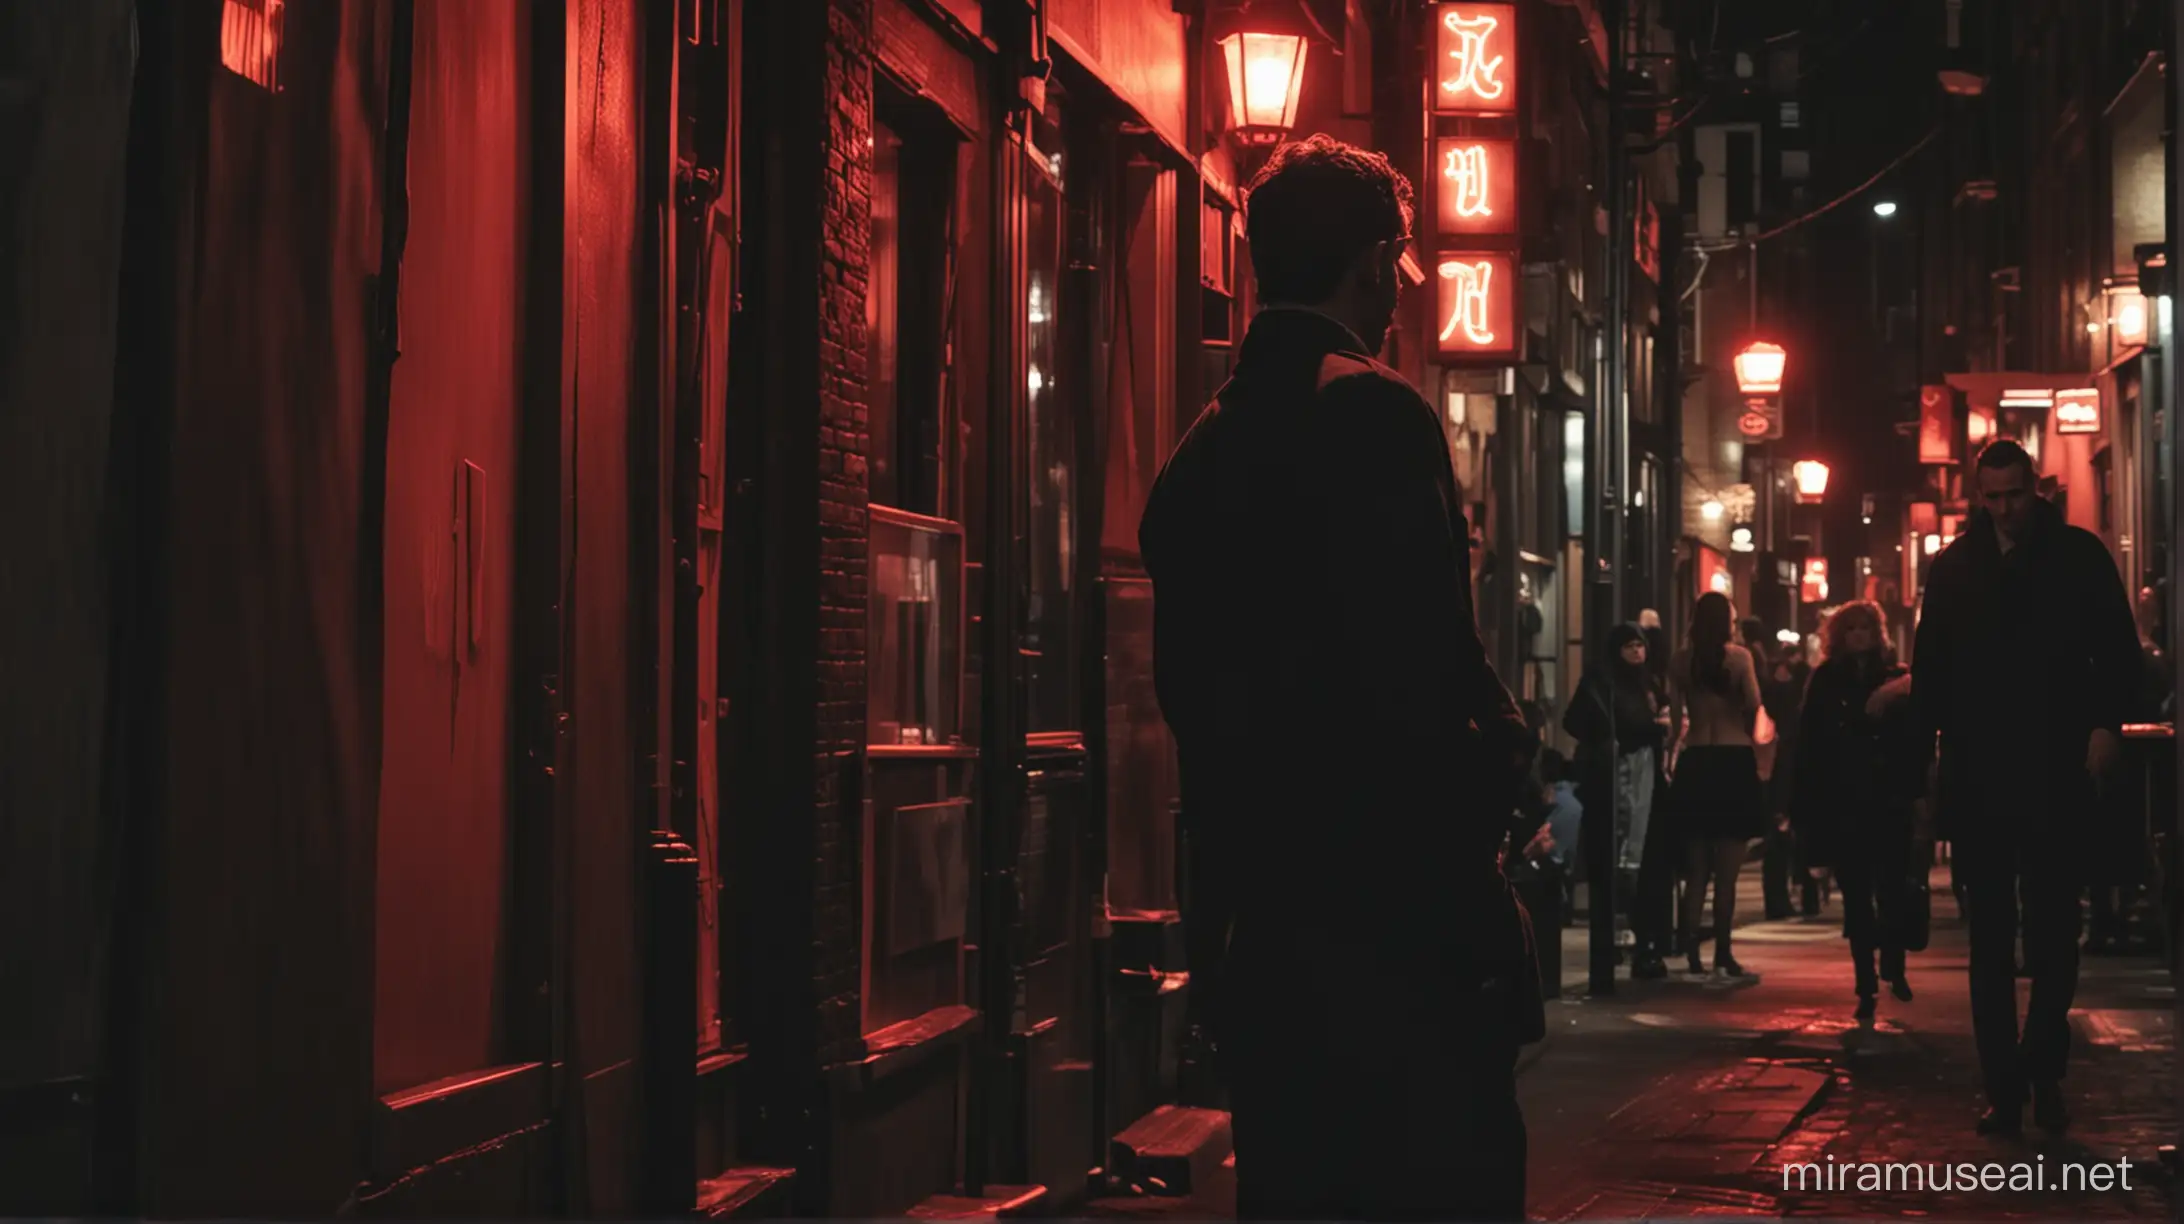 Subject: A man in foreground looks at a clothed prostitute in the background

Setting: red light district

Style: dark, moody, seedy, cinematic lighting

